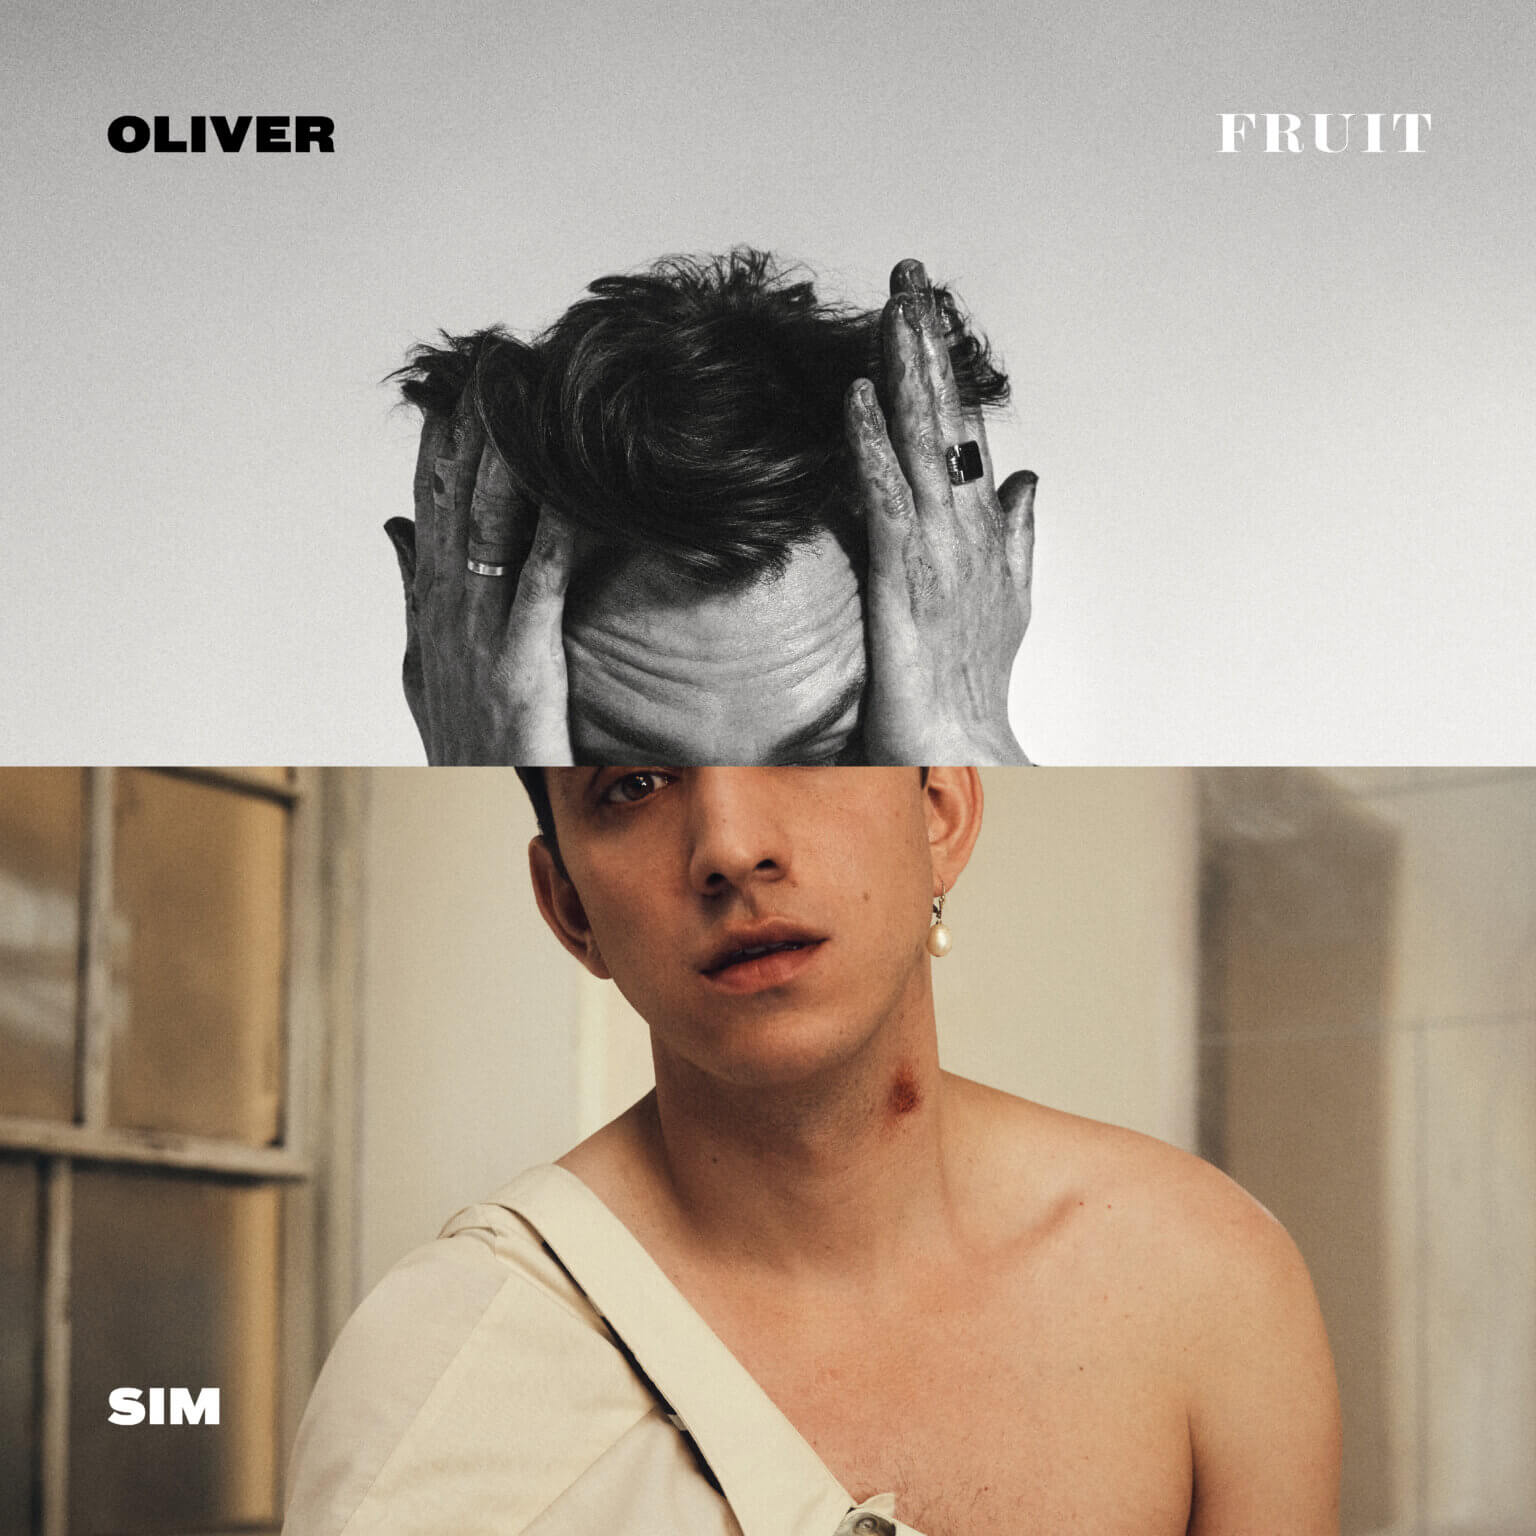 Oliver Sim, is known for his work as songwriter, bassist and vocalist for The xx. Today, he has shared his new Jamie xx-produced song, "Fruit"